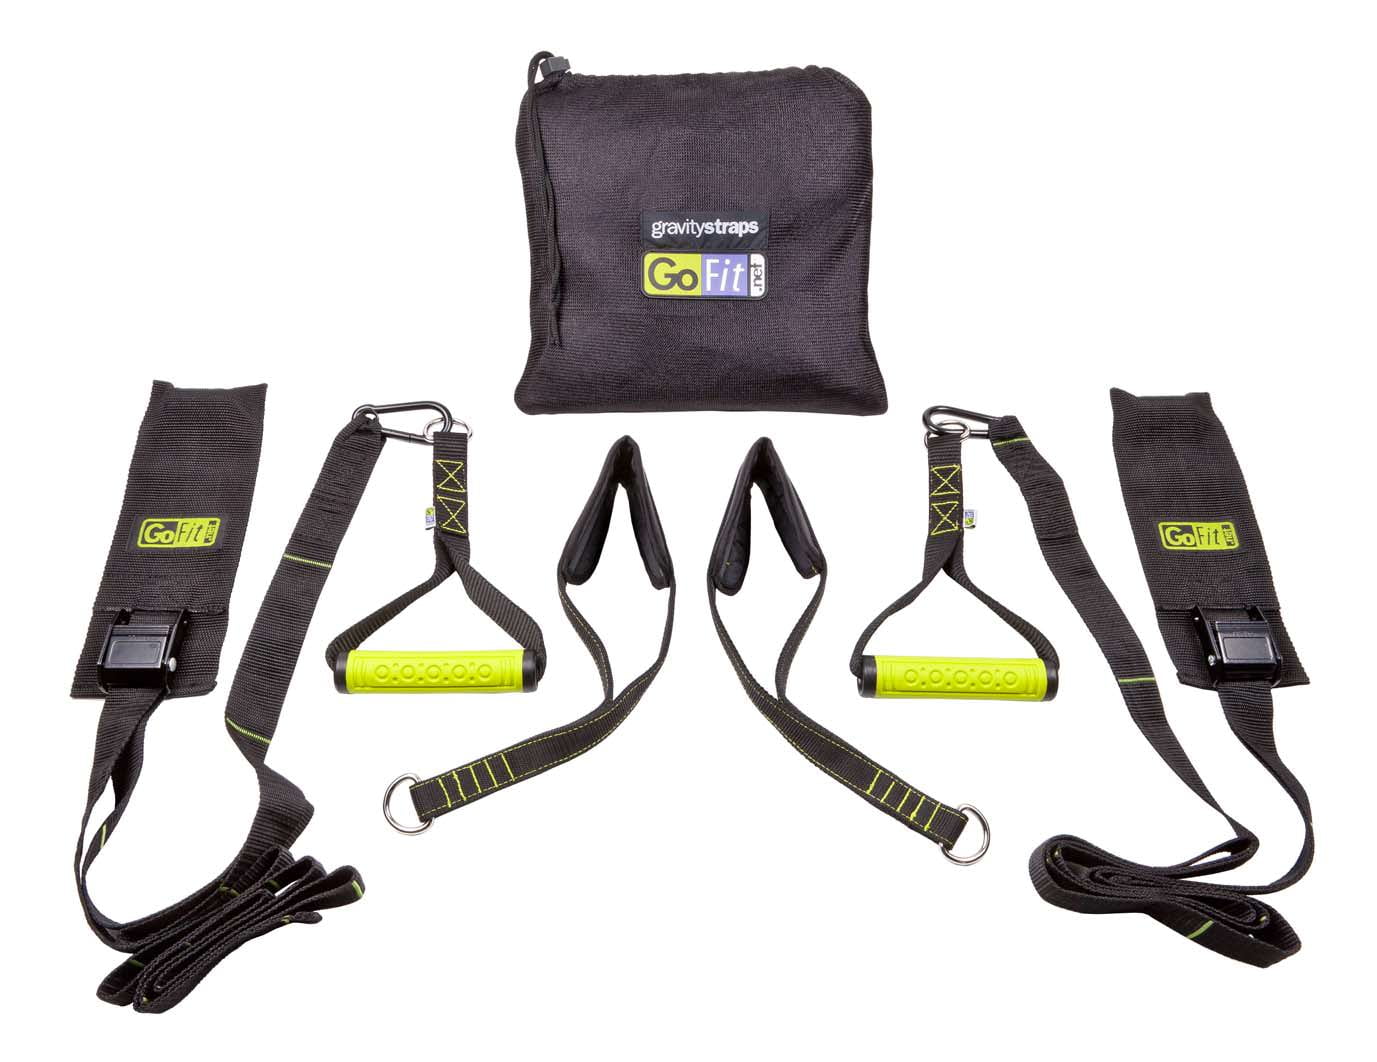 Opti Total Suspension Trainer Carry bag included **FREE AND FAST DELIVERY** 